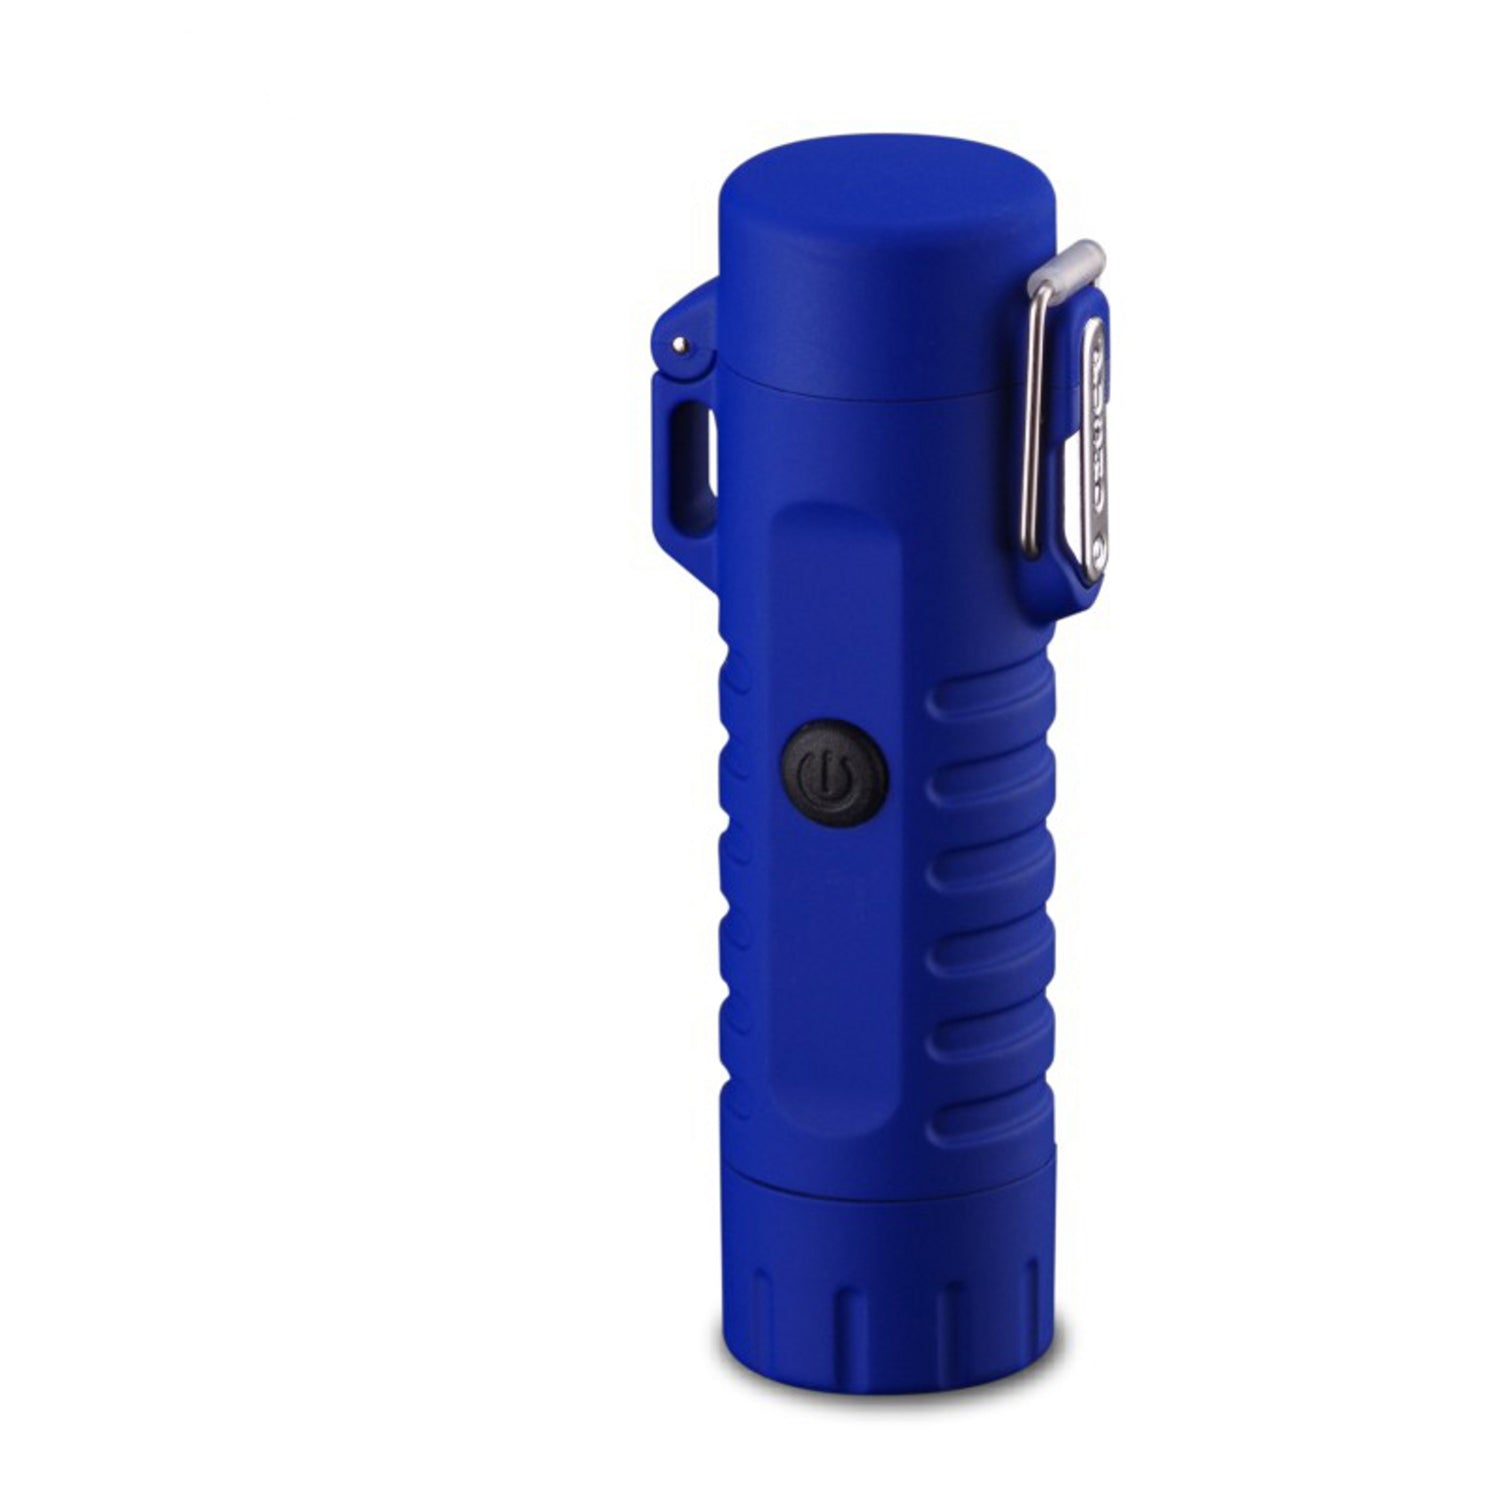 Tactical Waterproof Dual Arc Lighter- 5 colours Available